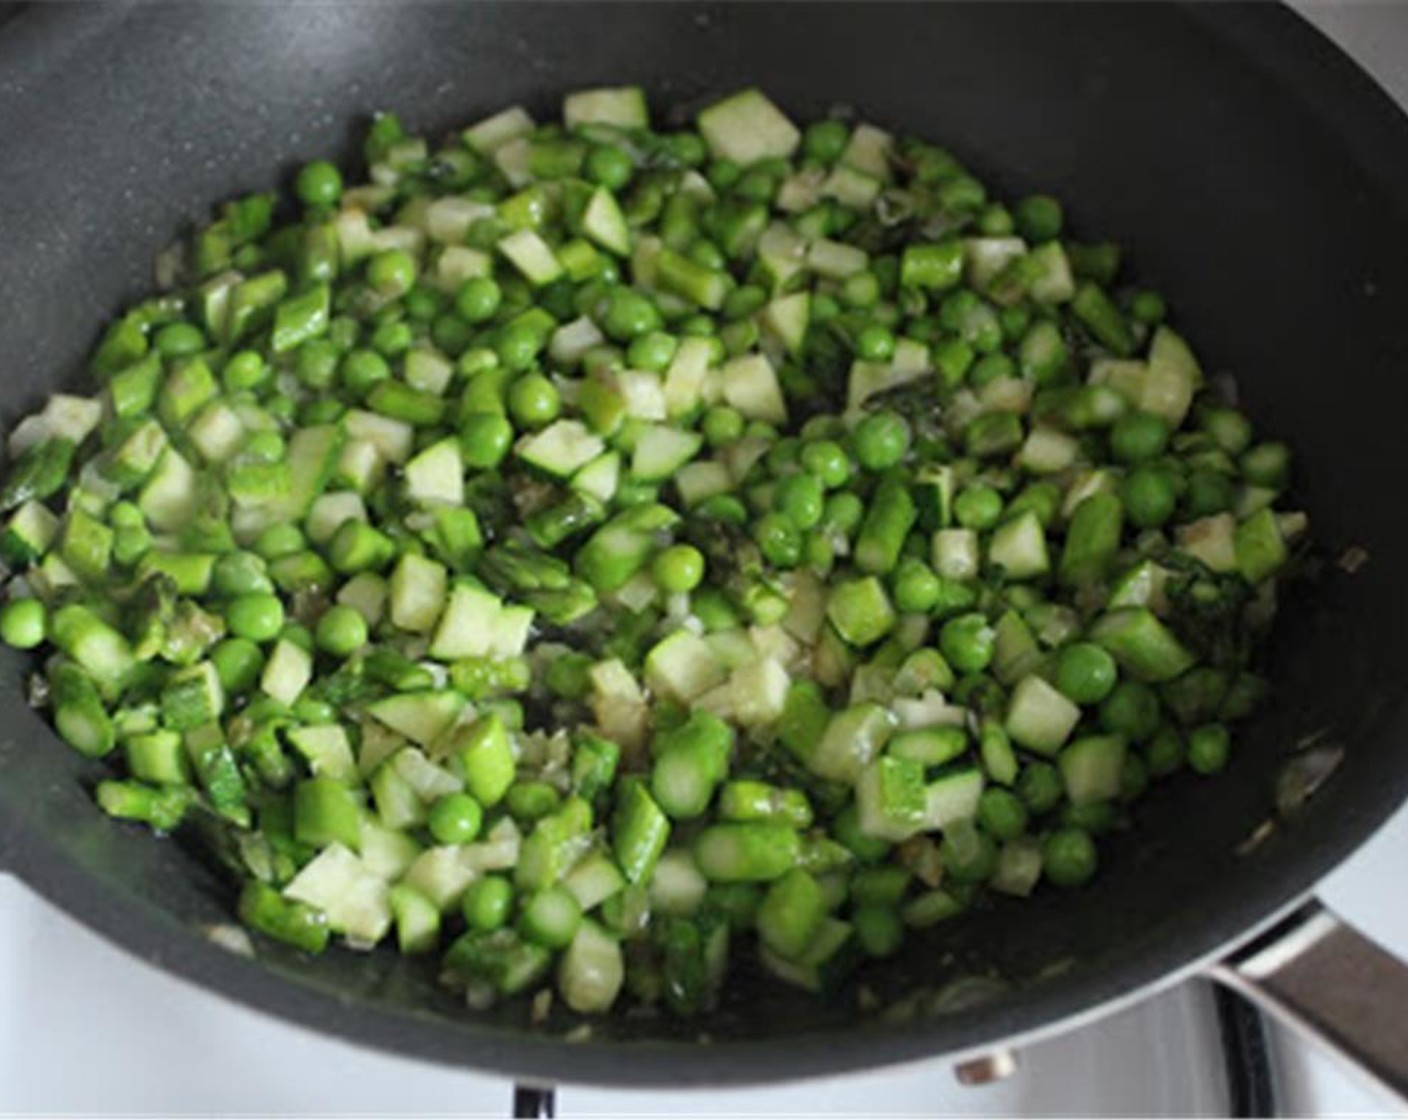 step 5 Add the shelled fresh peas, asparagus, and zucchini to the pan. Cover and cook for 3 minutes over medium heat until just tender.